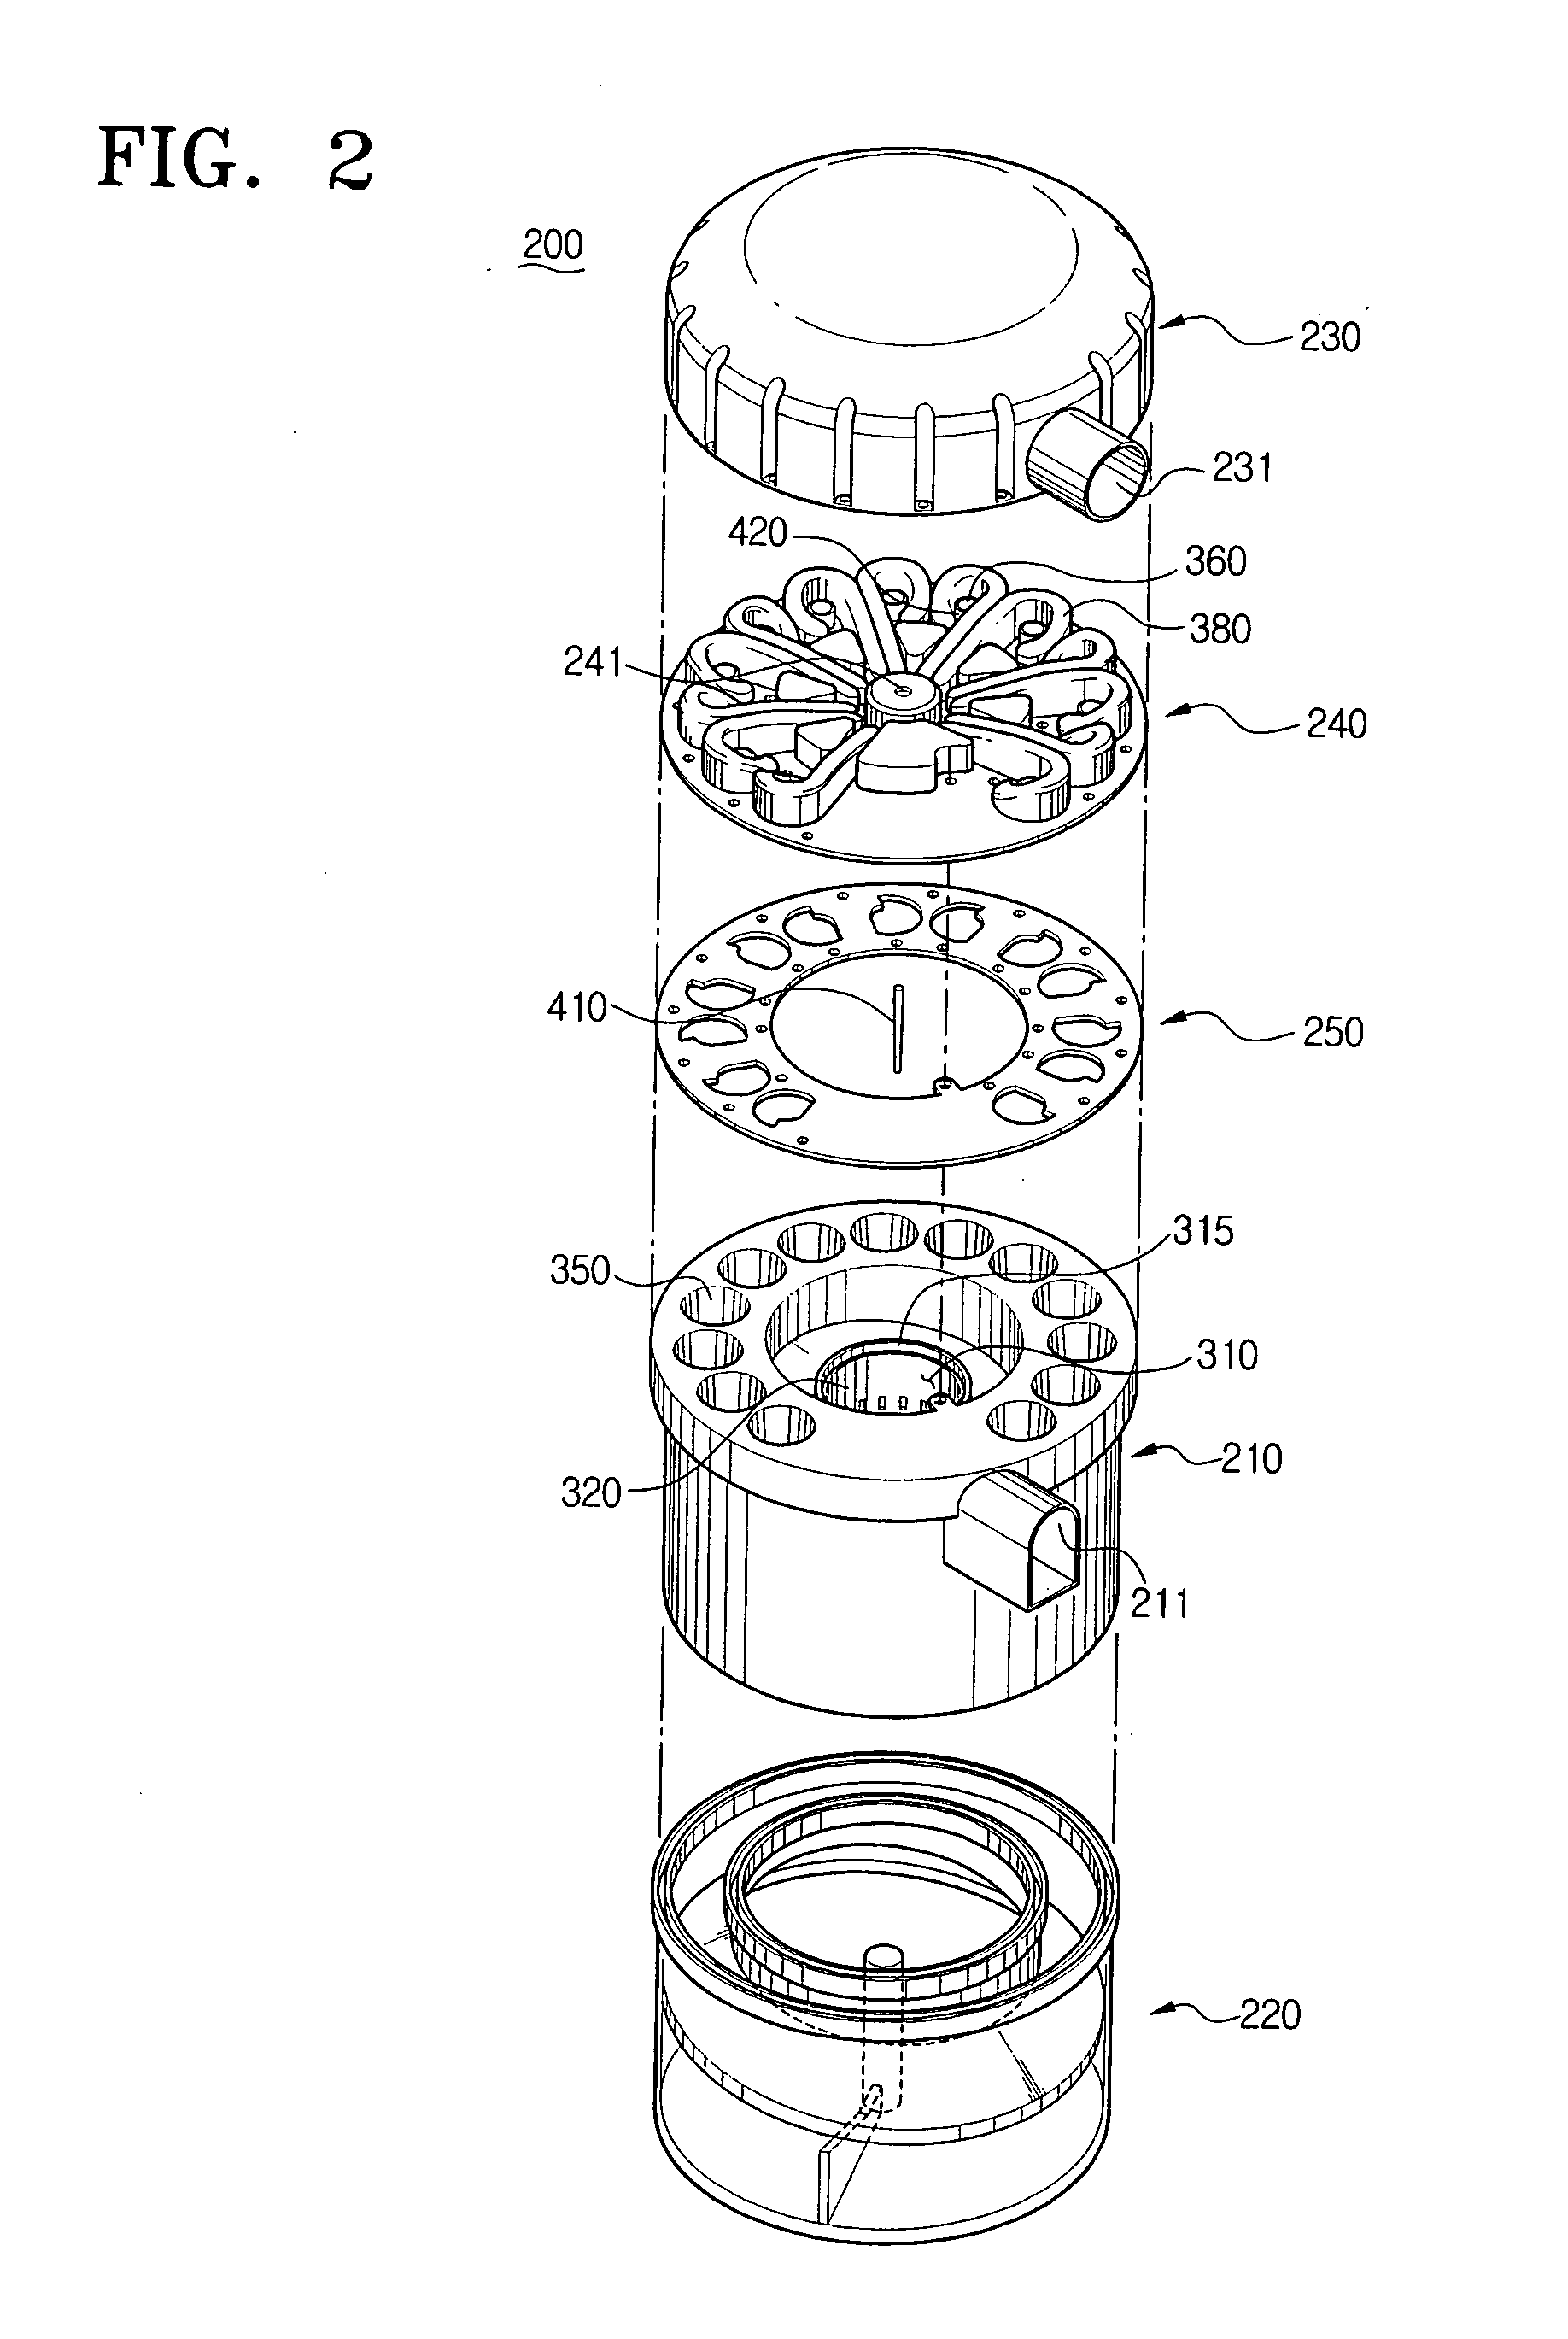 Cyclone dust collecting device for vacuum cleaner